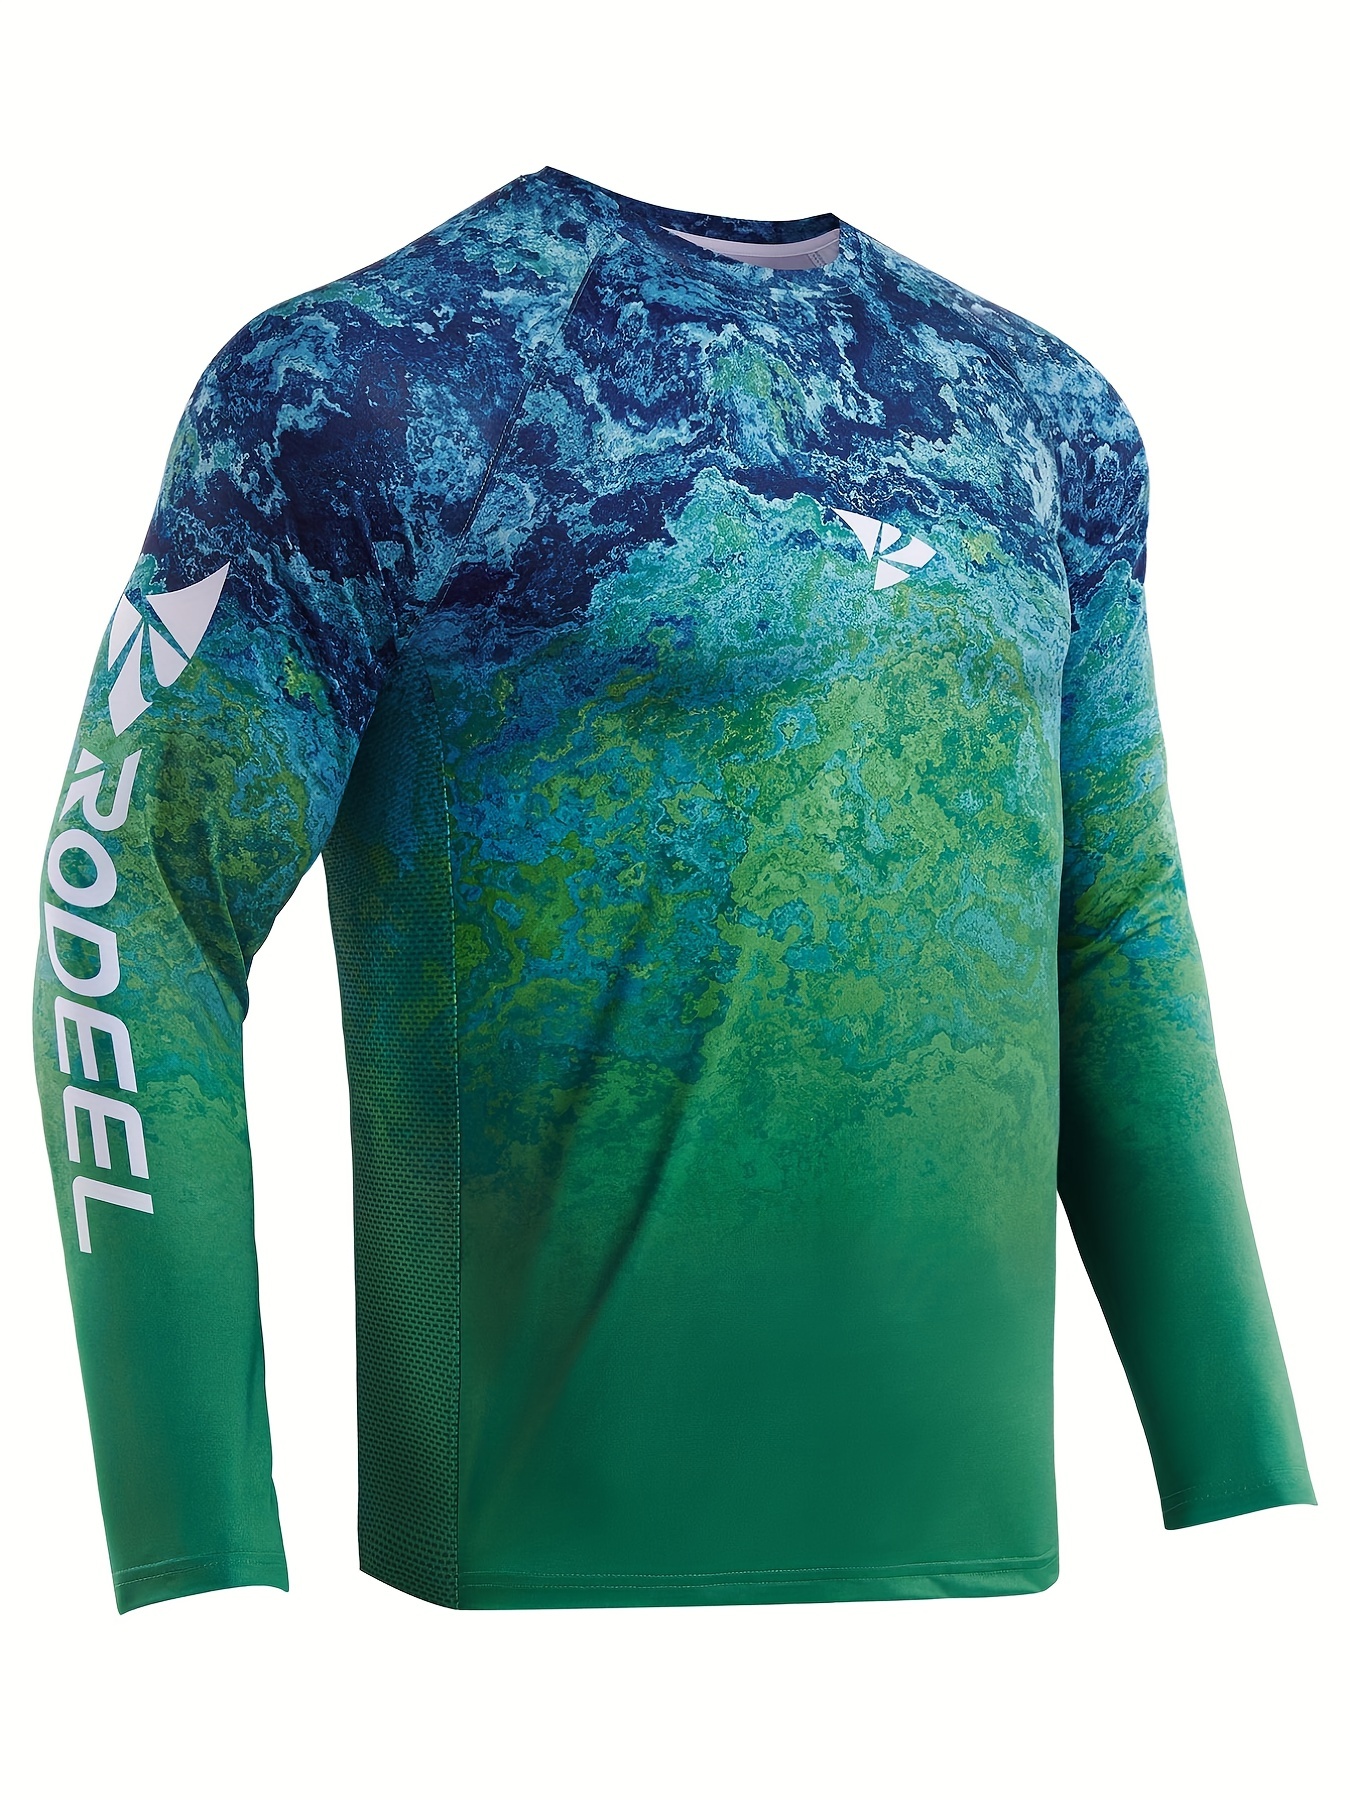 Men's Upf 50+ Sun Protection Camo Shirt: Quick Dry, Breathable, Moisture Wicking Long Sleeves Rash Guard For Fishing, Hiking & Outdoor Activities